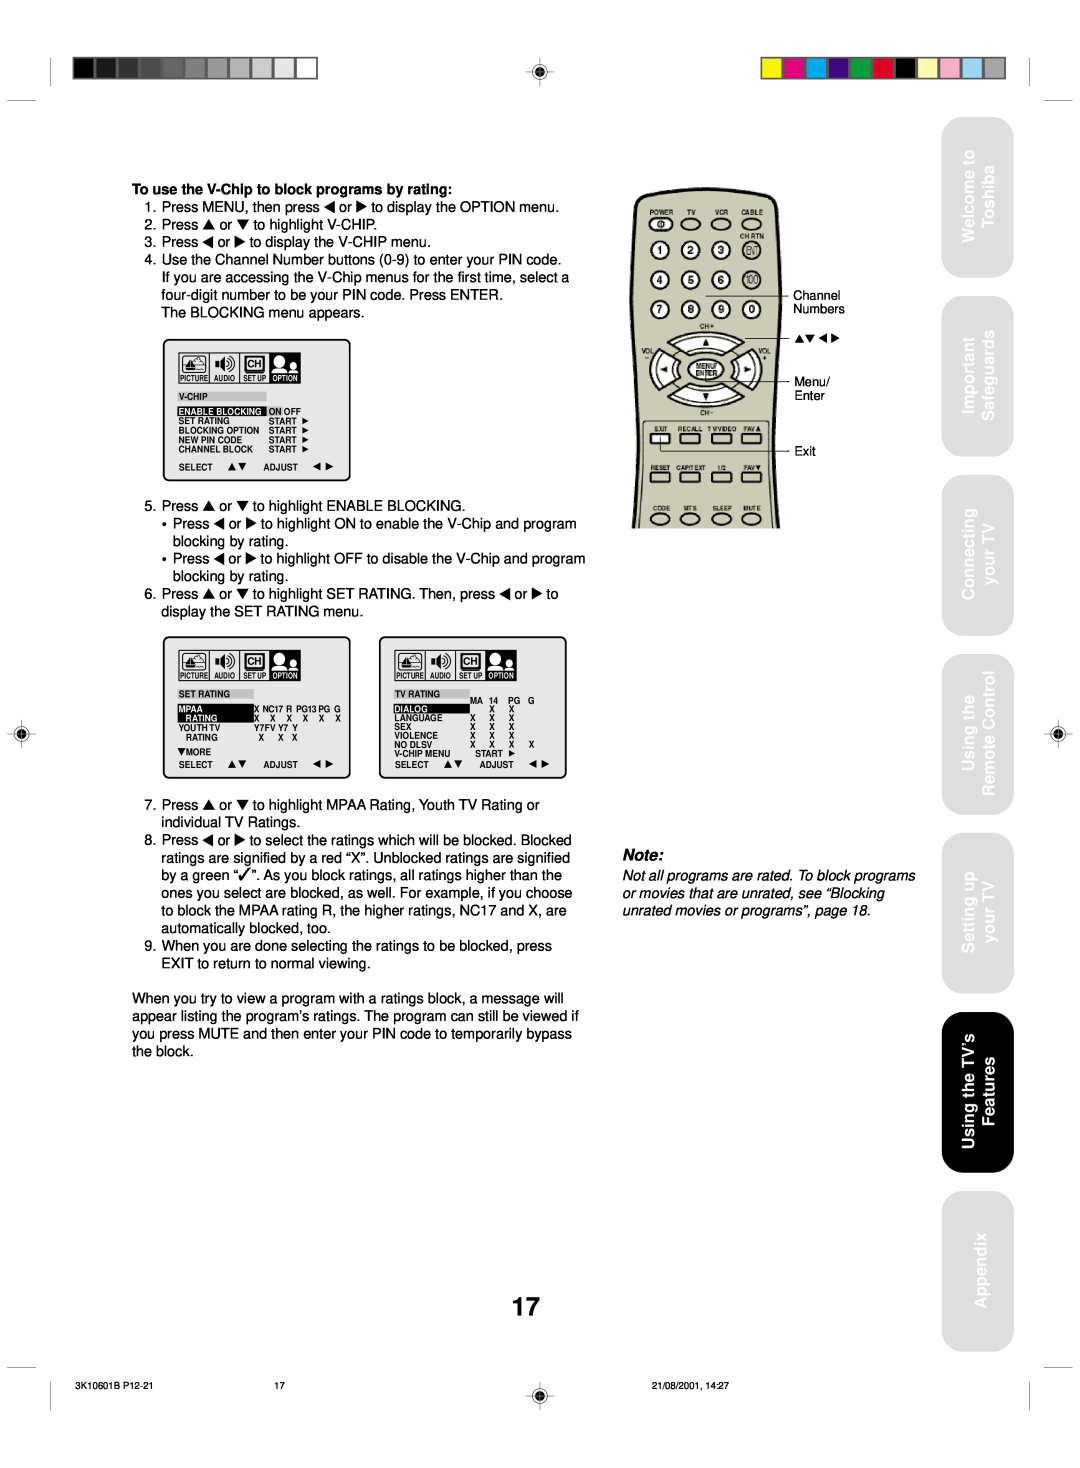 Toshiba 27A41 appendix Connecting your TV Using the Remote Control, Welcome to Toshiba, Safeguards, Appendix 